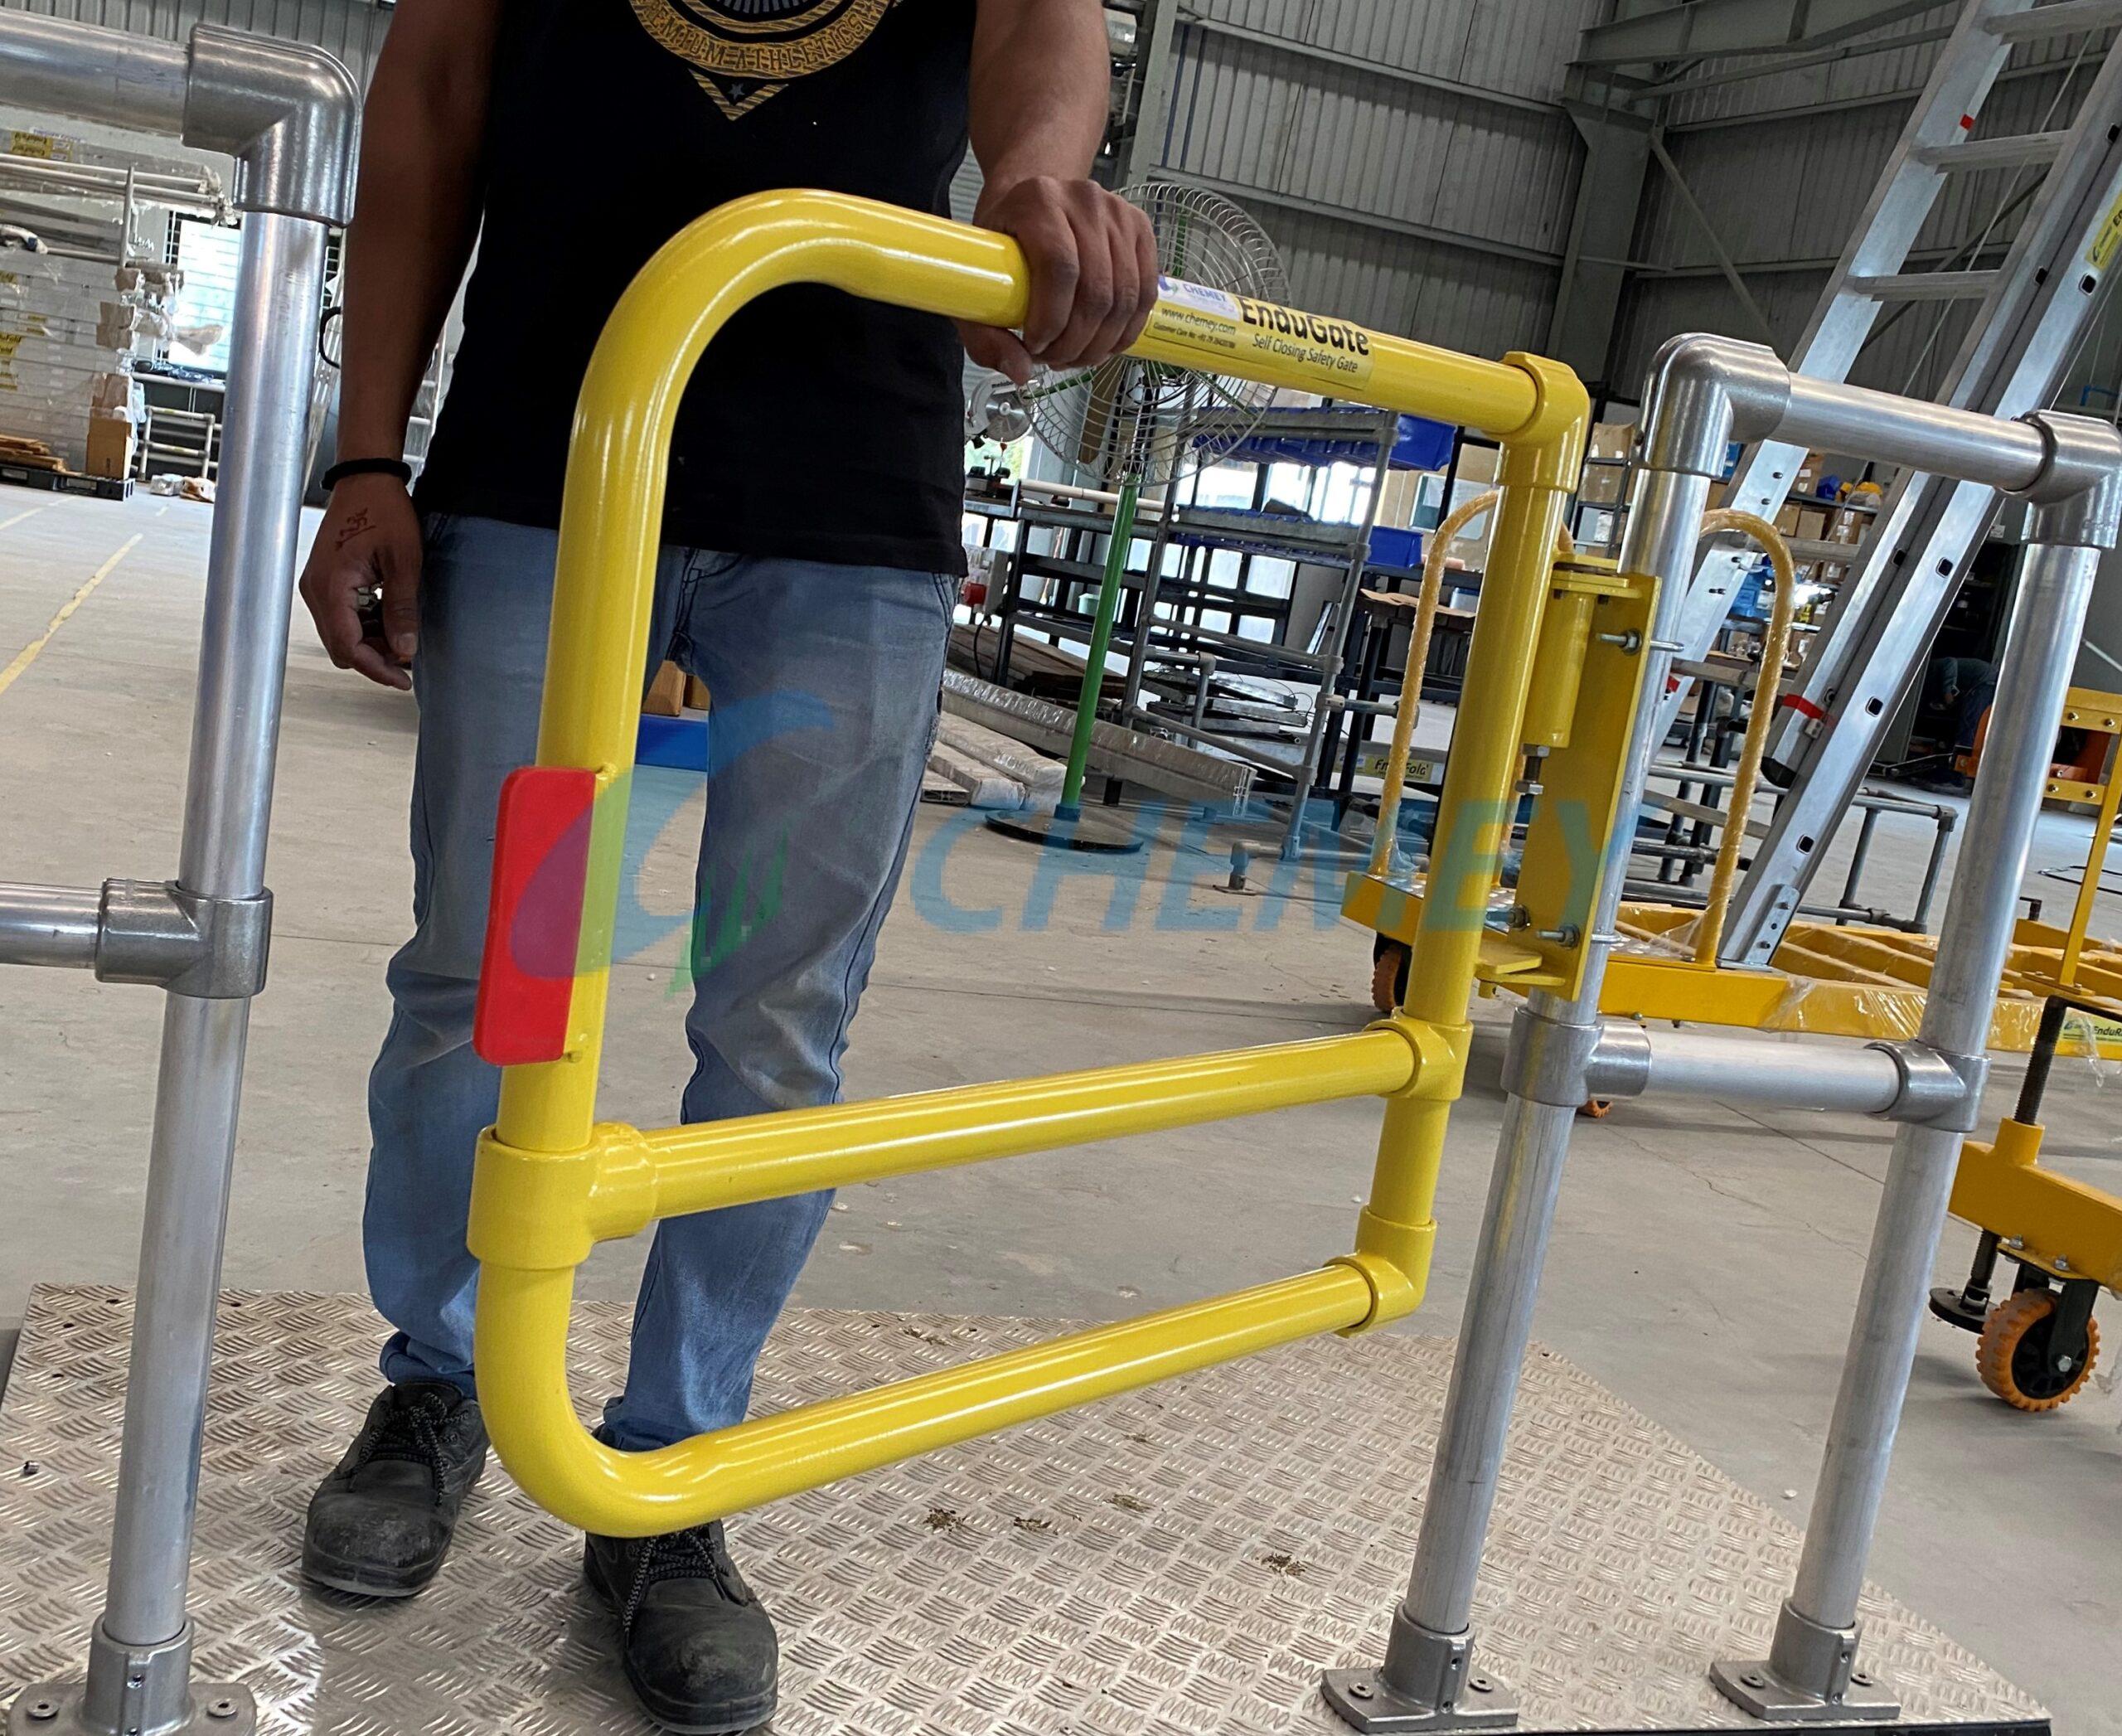 Preventing Falls From Height – Spring Loaded Safety Gates